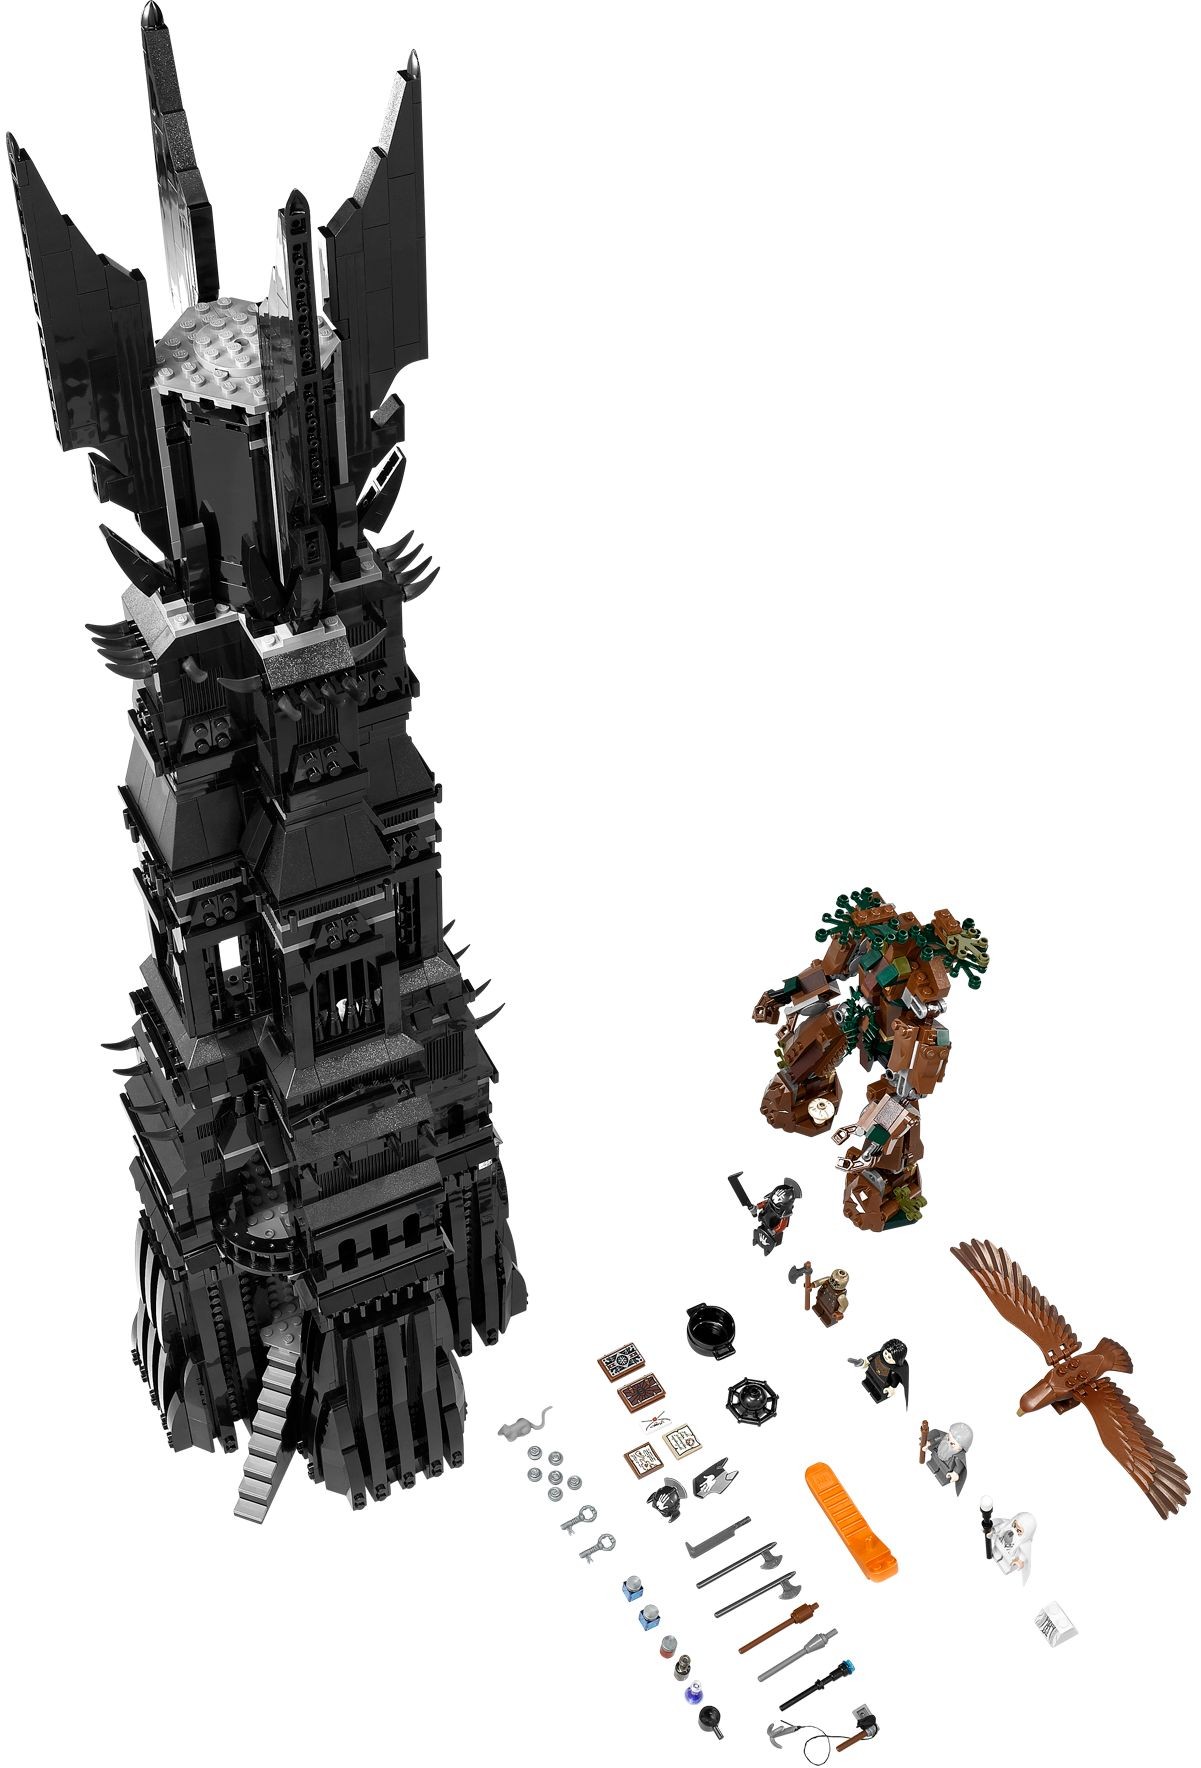 LEGO Lord of the Rings Tower of Orthanc